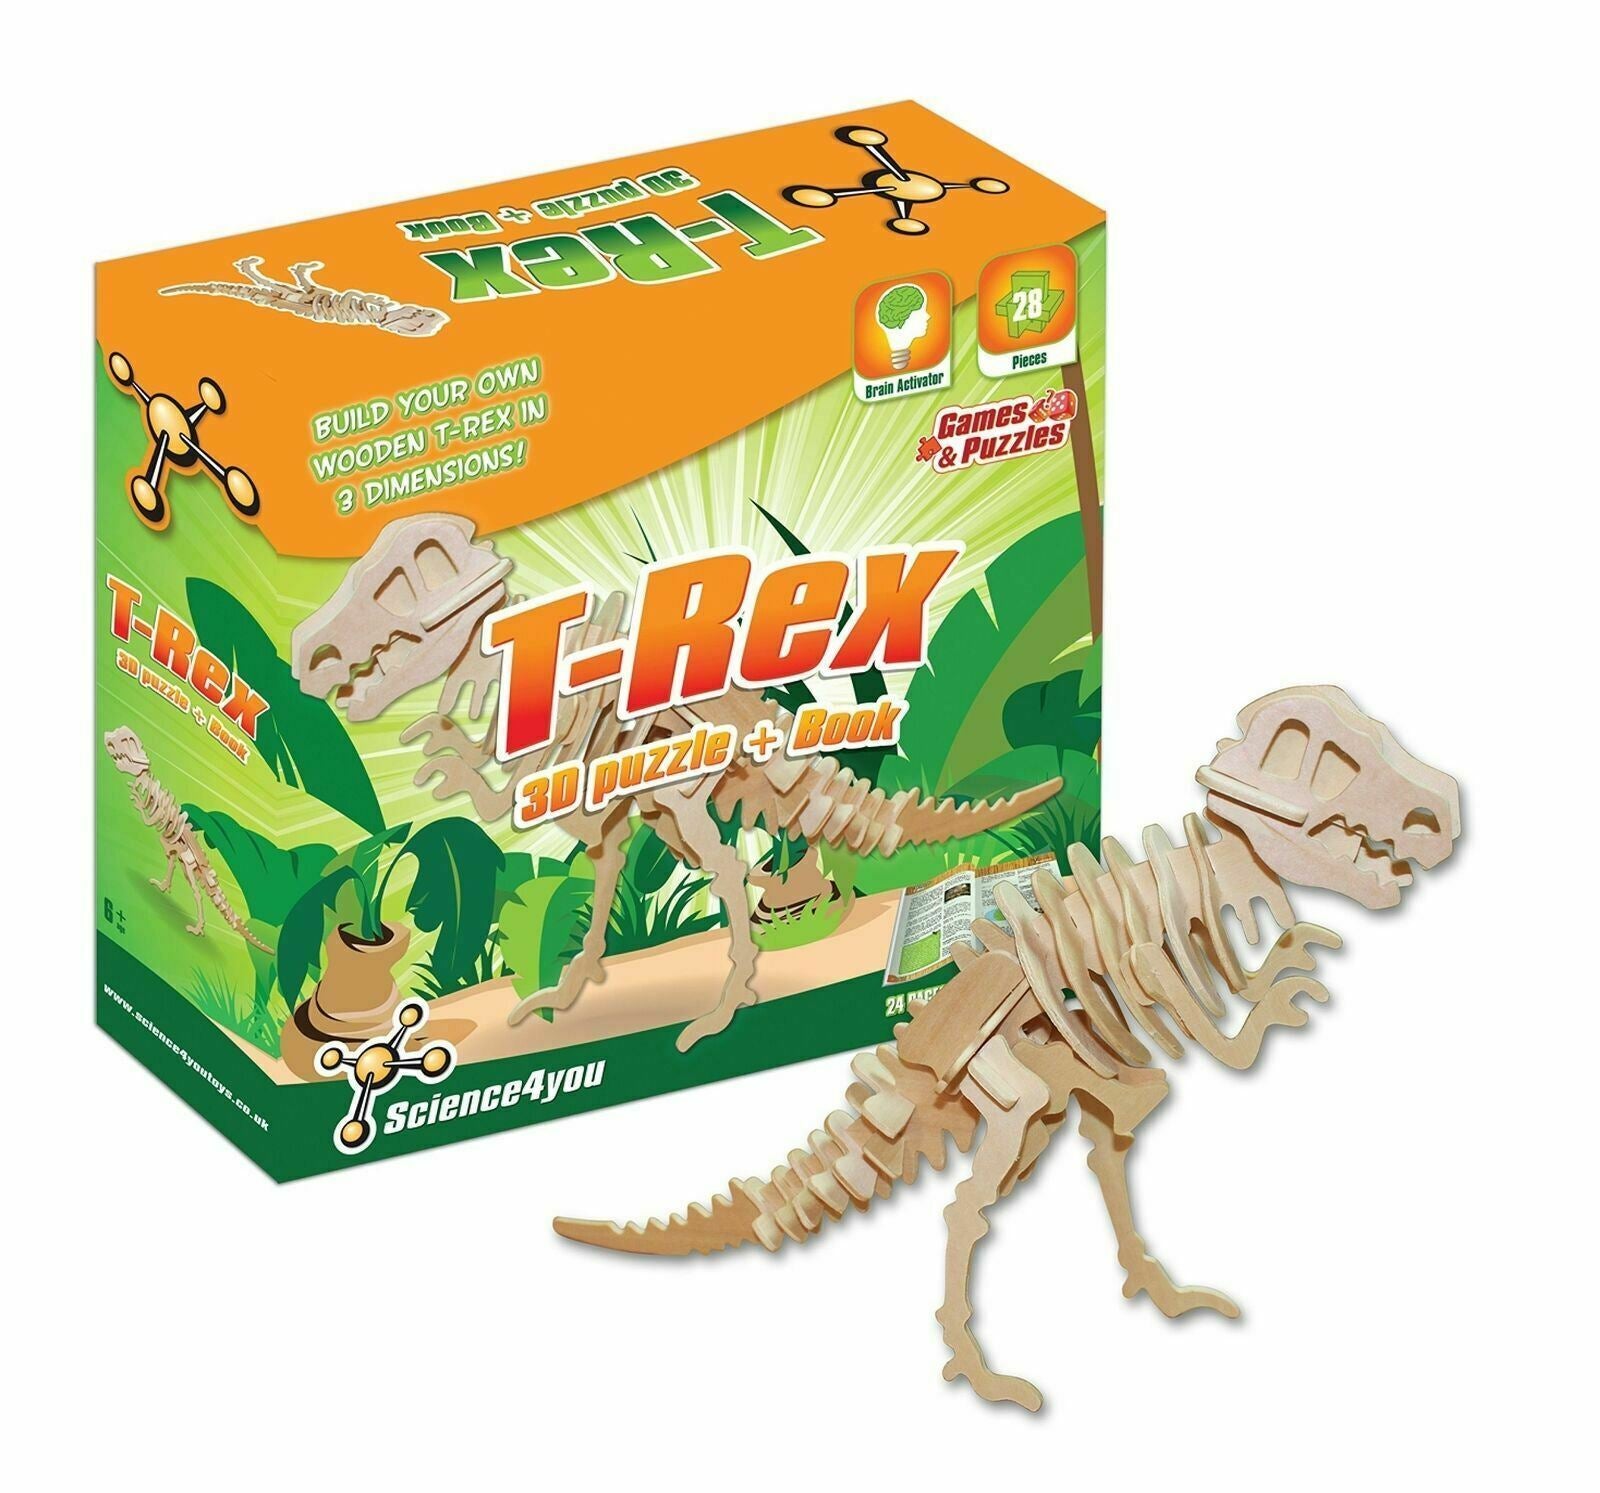 Science4you T-REX 3D Wooden Puzzle Educational Science Toy STEM Toy